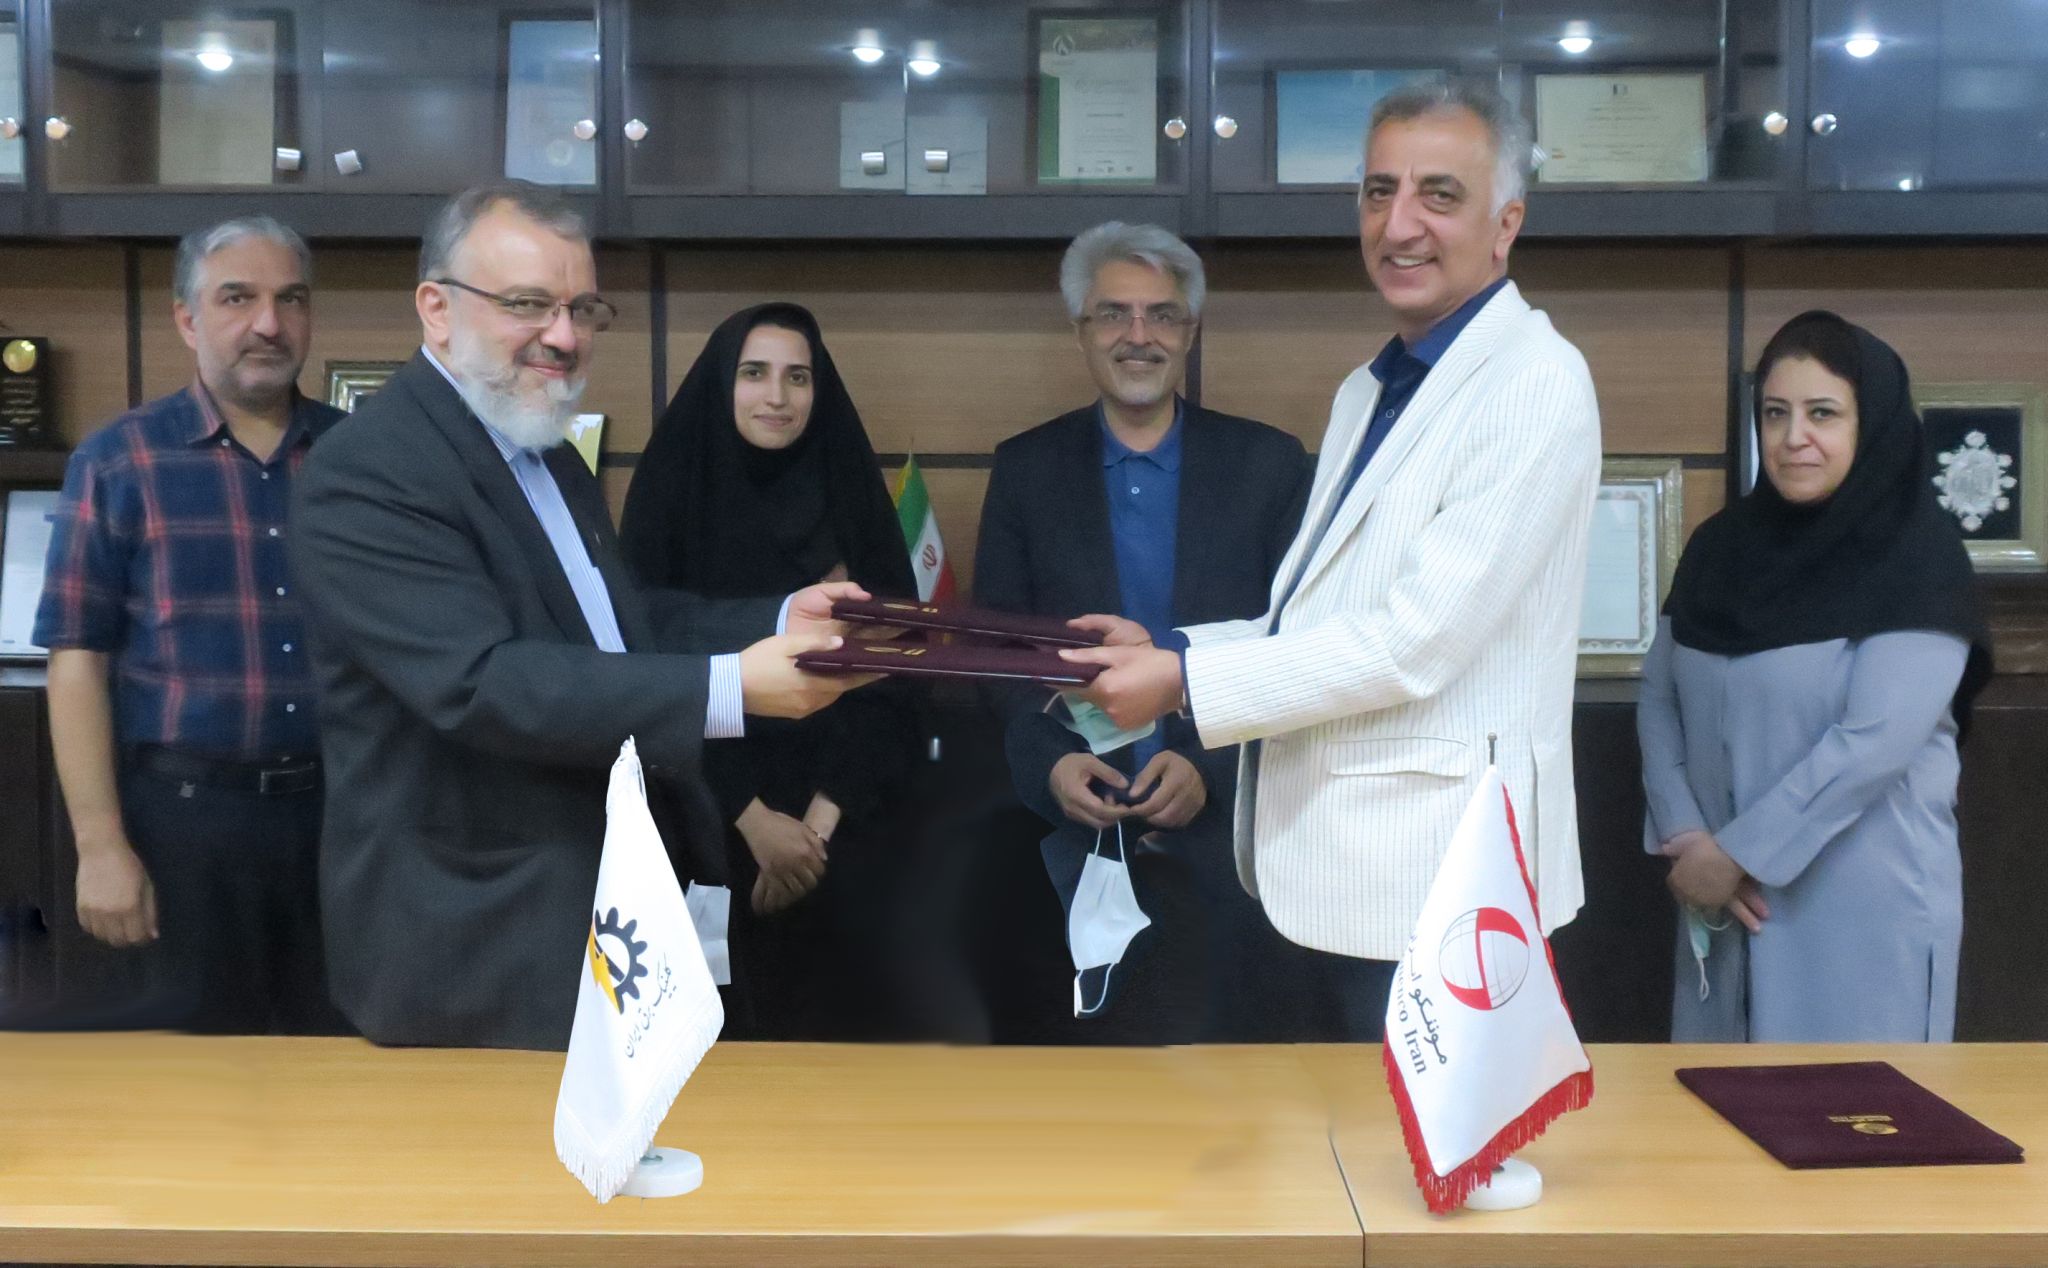 Signing a memorandum of cooperation between Monenco Iran and Iran Electricity Clinic regarding holding technical training courses and development of technical and electrical engineering softwares